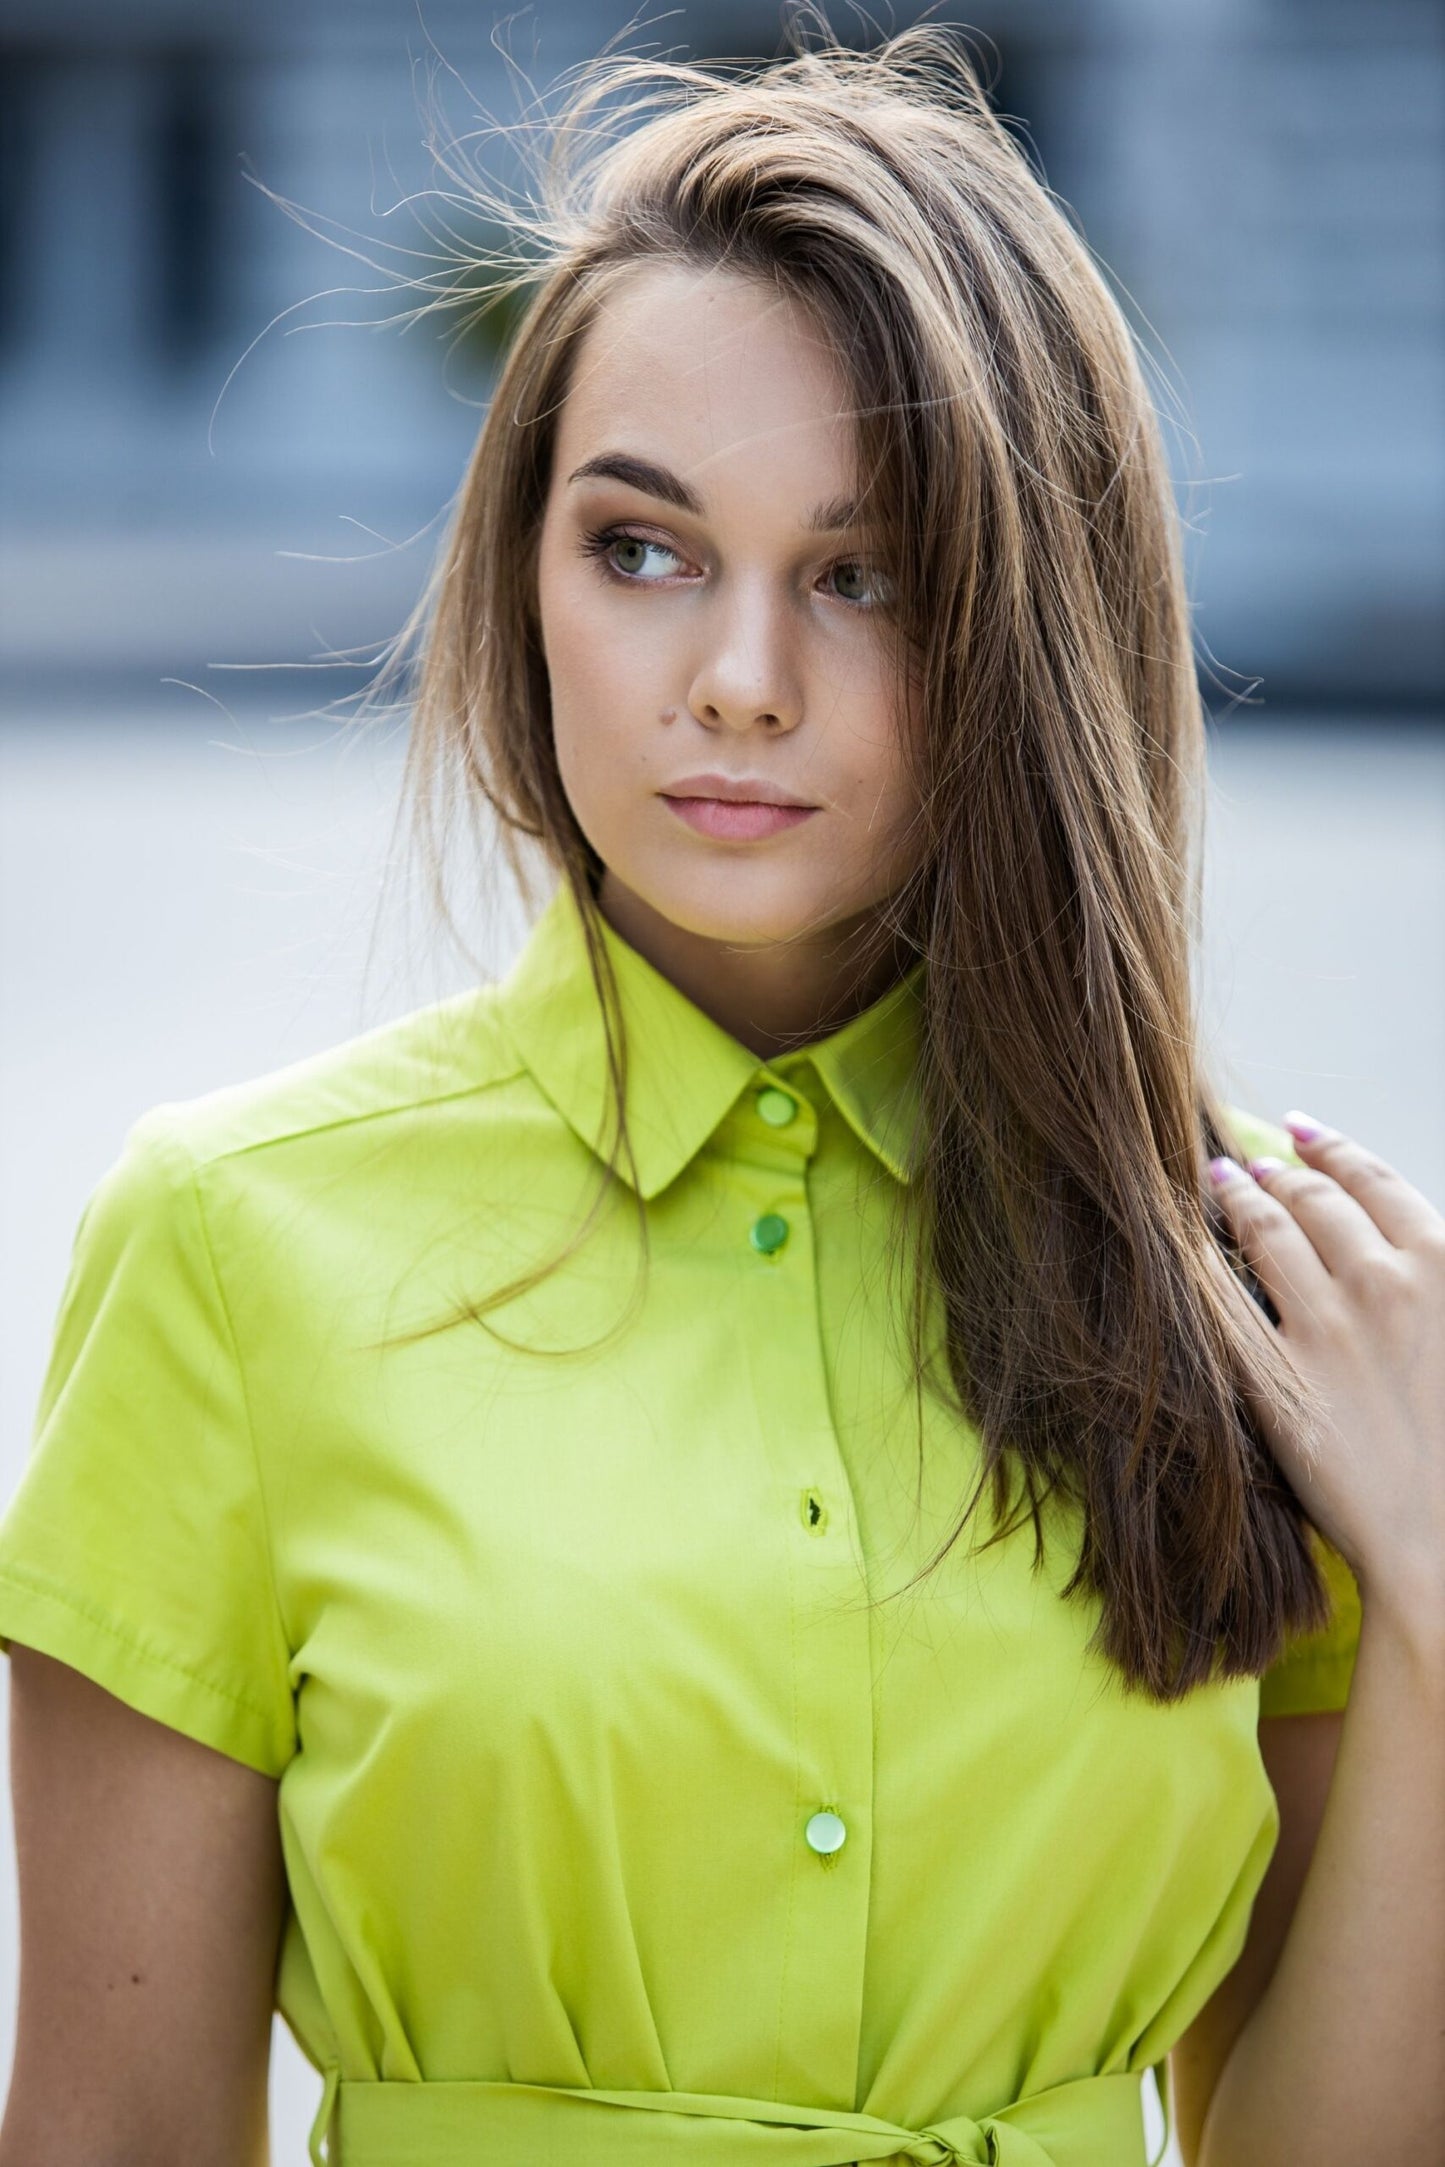 Lime cotton shirt with a belt